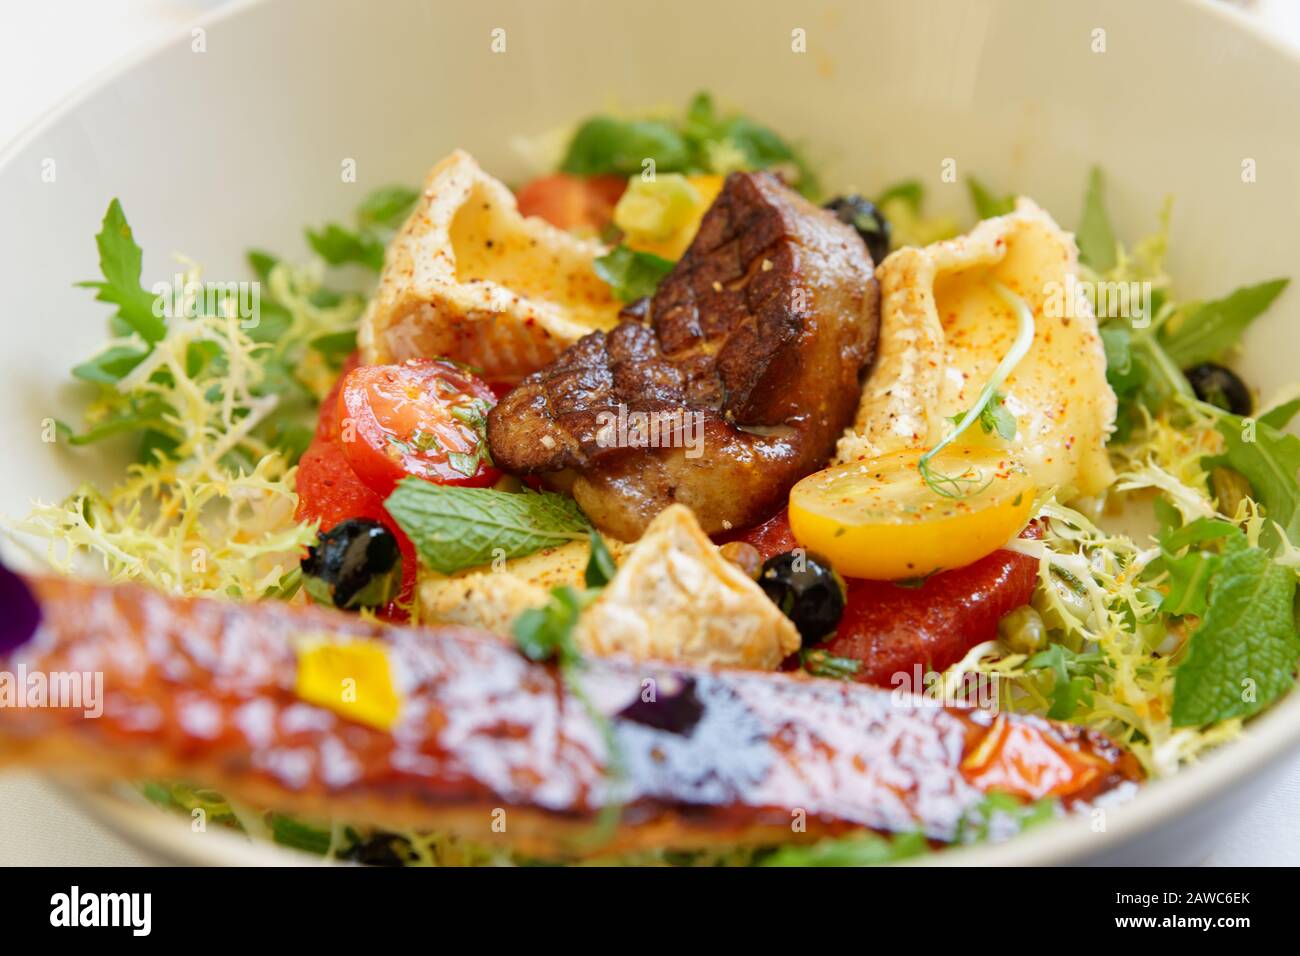 Appetizer of fried foie gras, camembert cheese and sweet bread, close-up Stock Photo